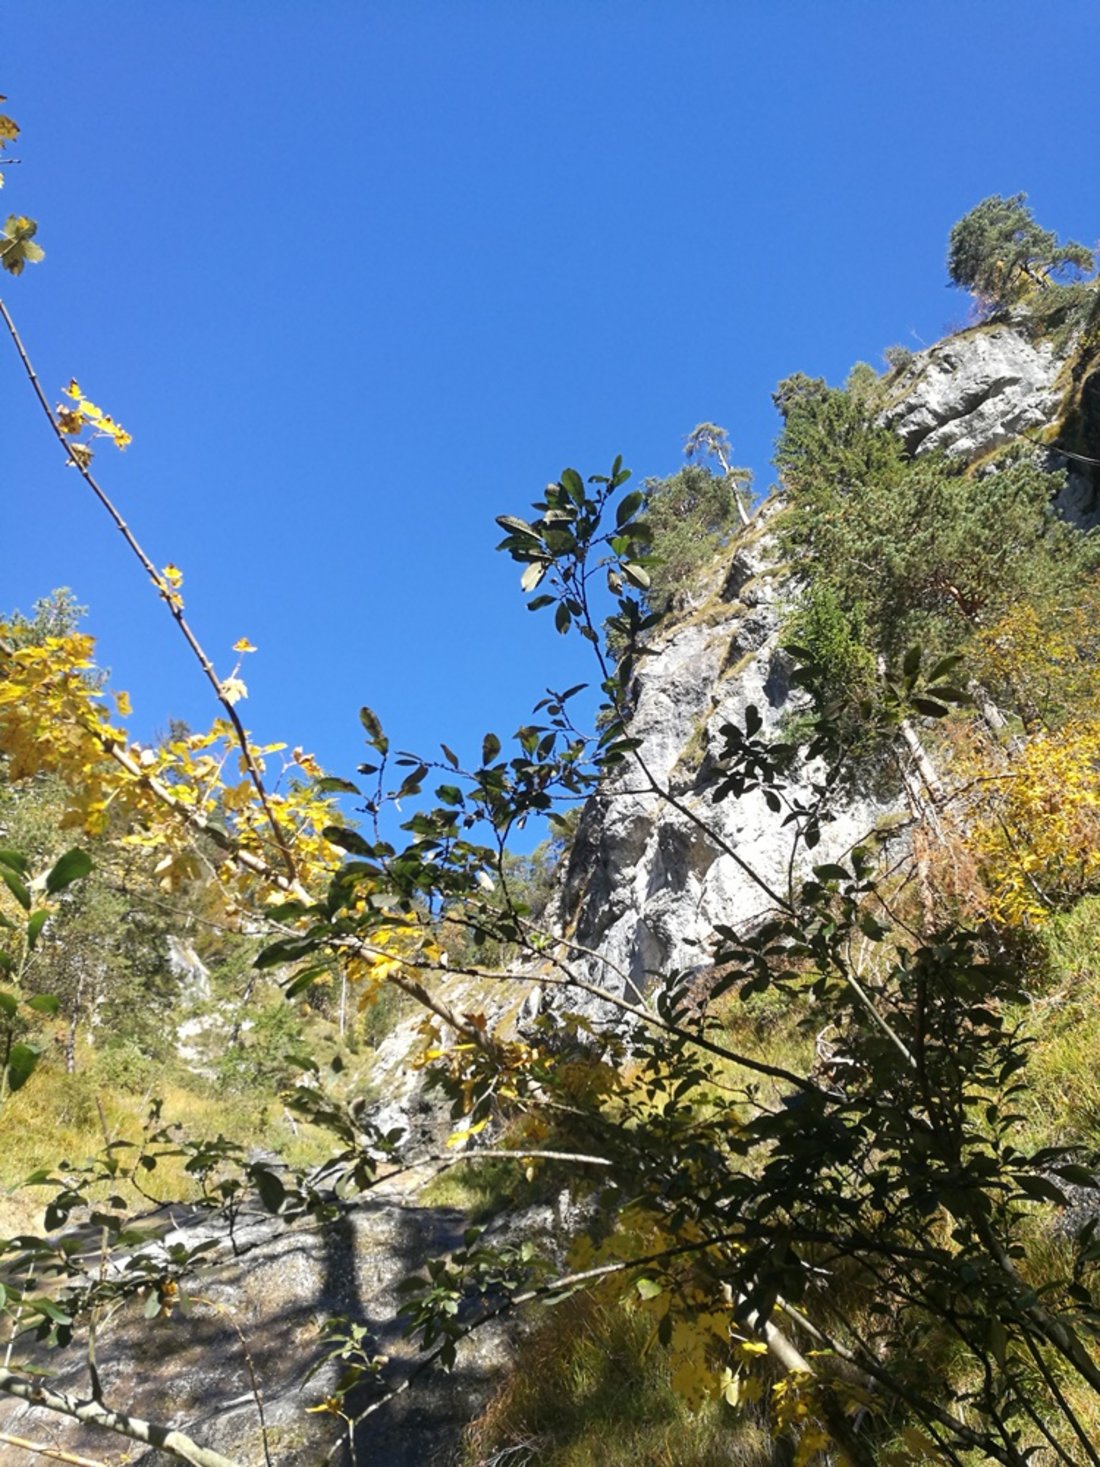 Bright blue sky over the Hausbach Falls in Reit im Winkl